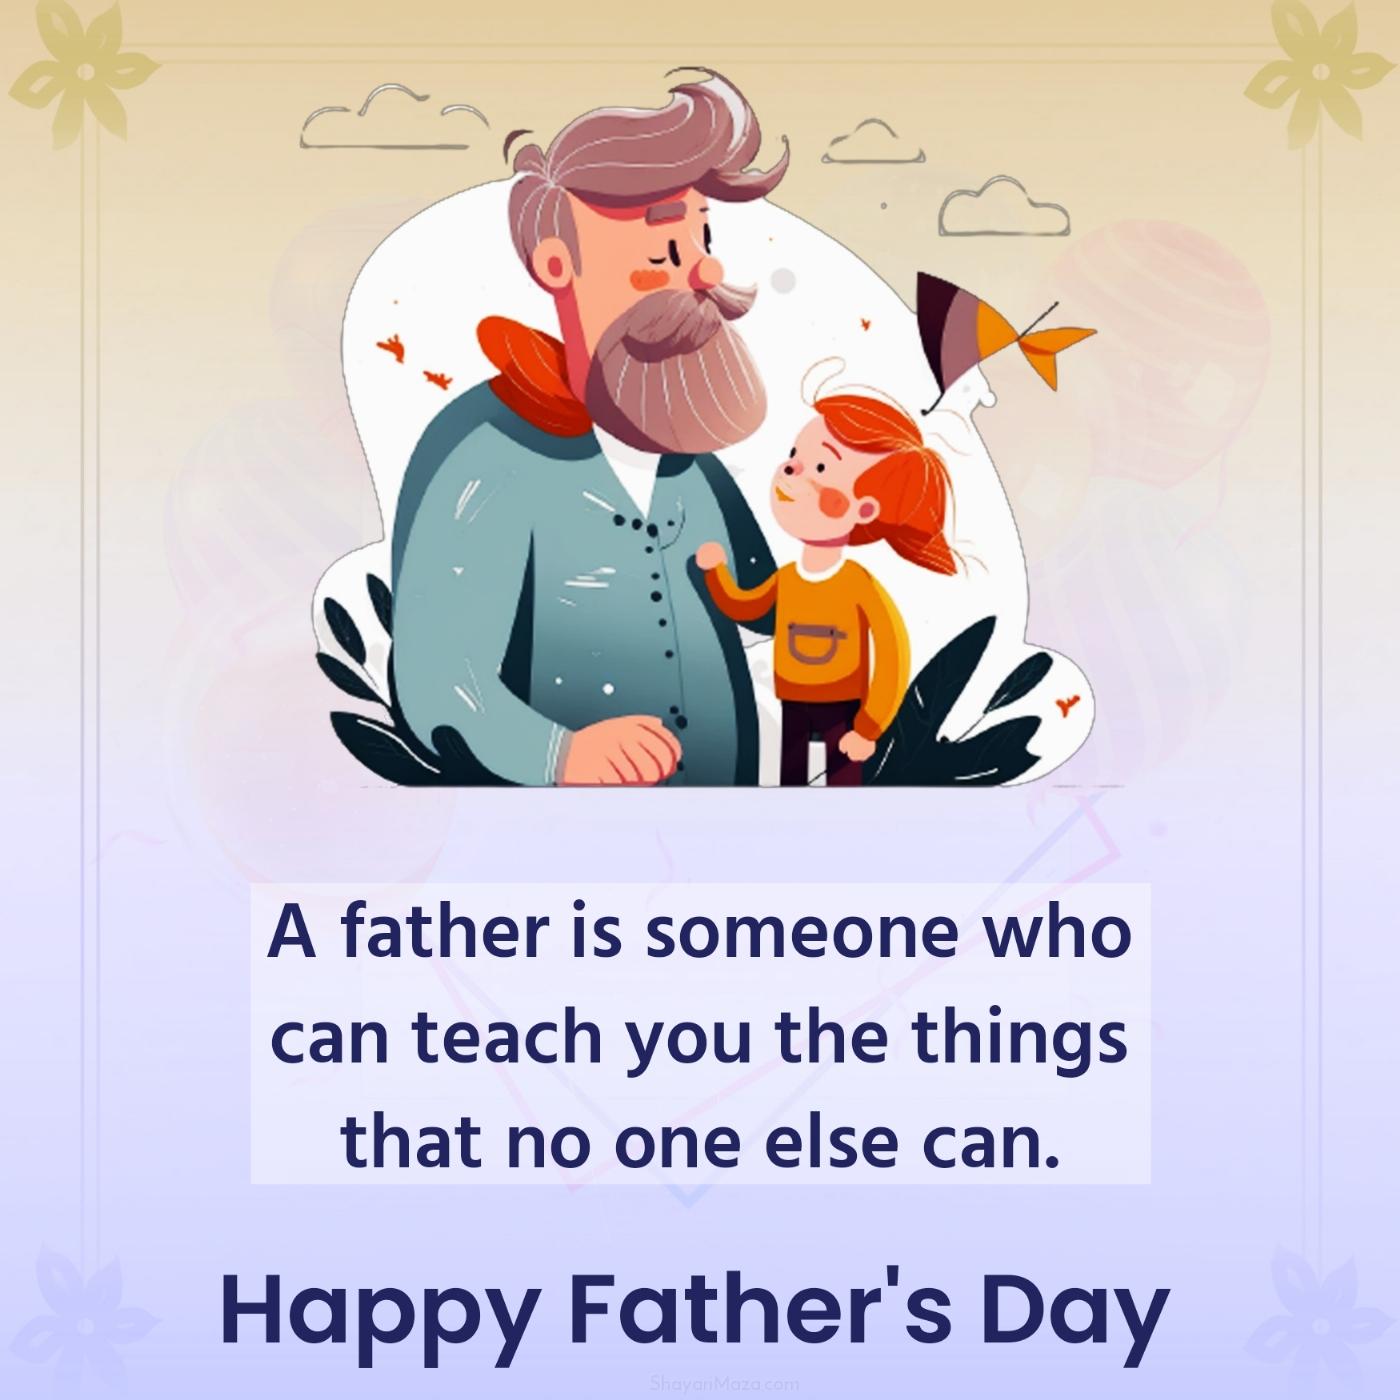 A father is someone who can teach you the things